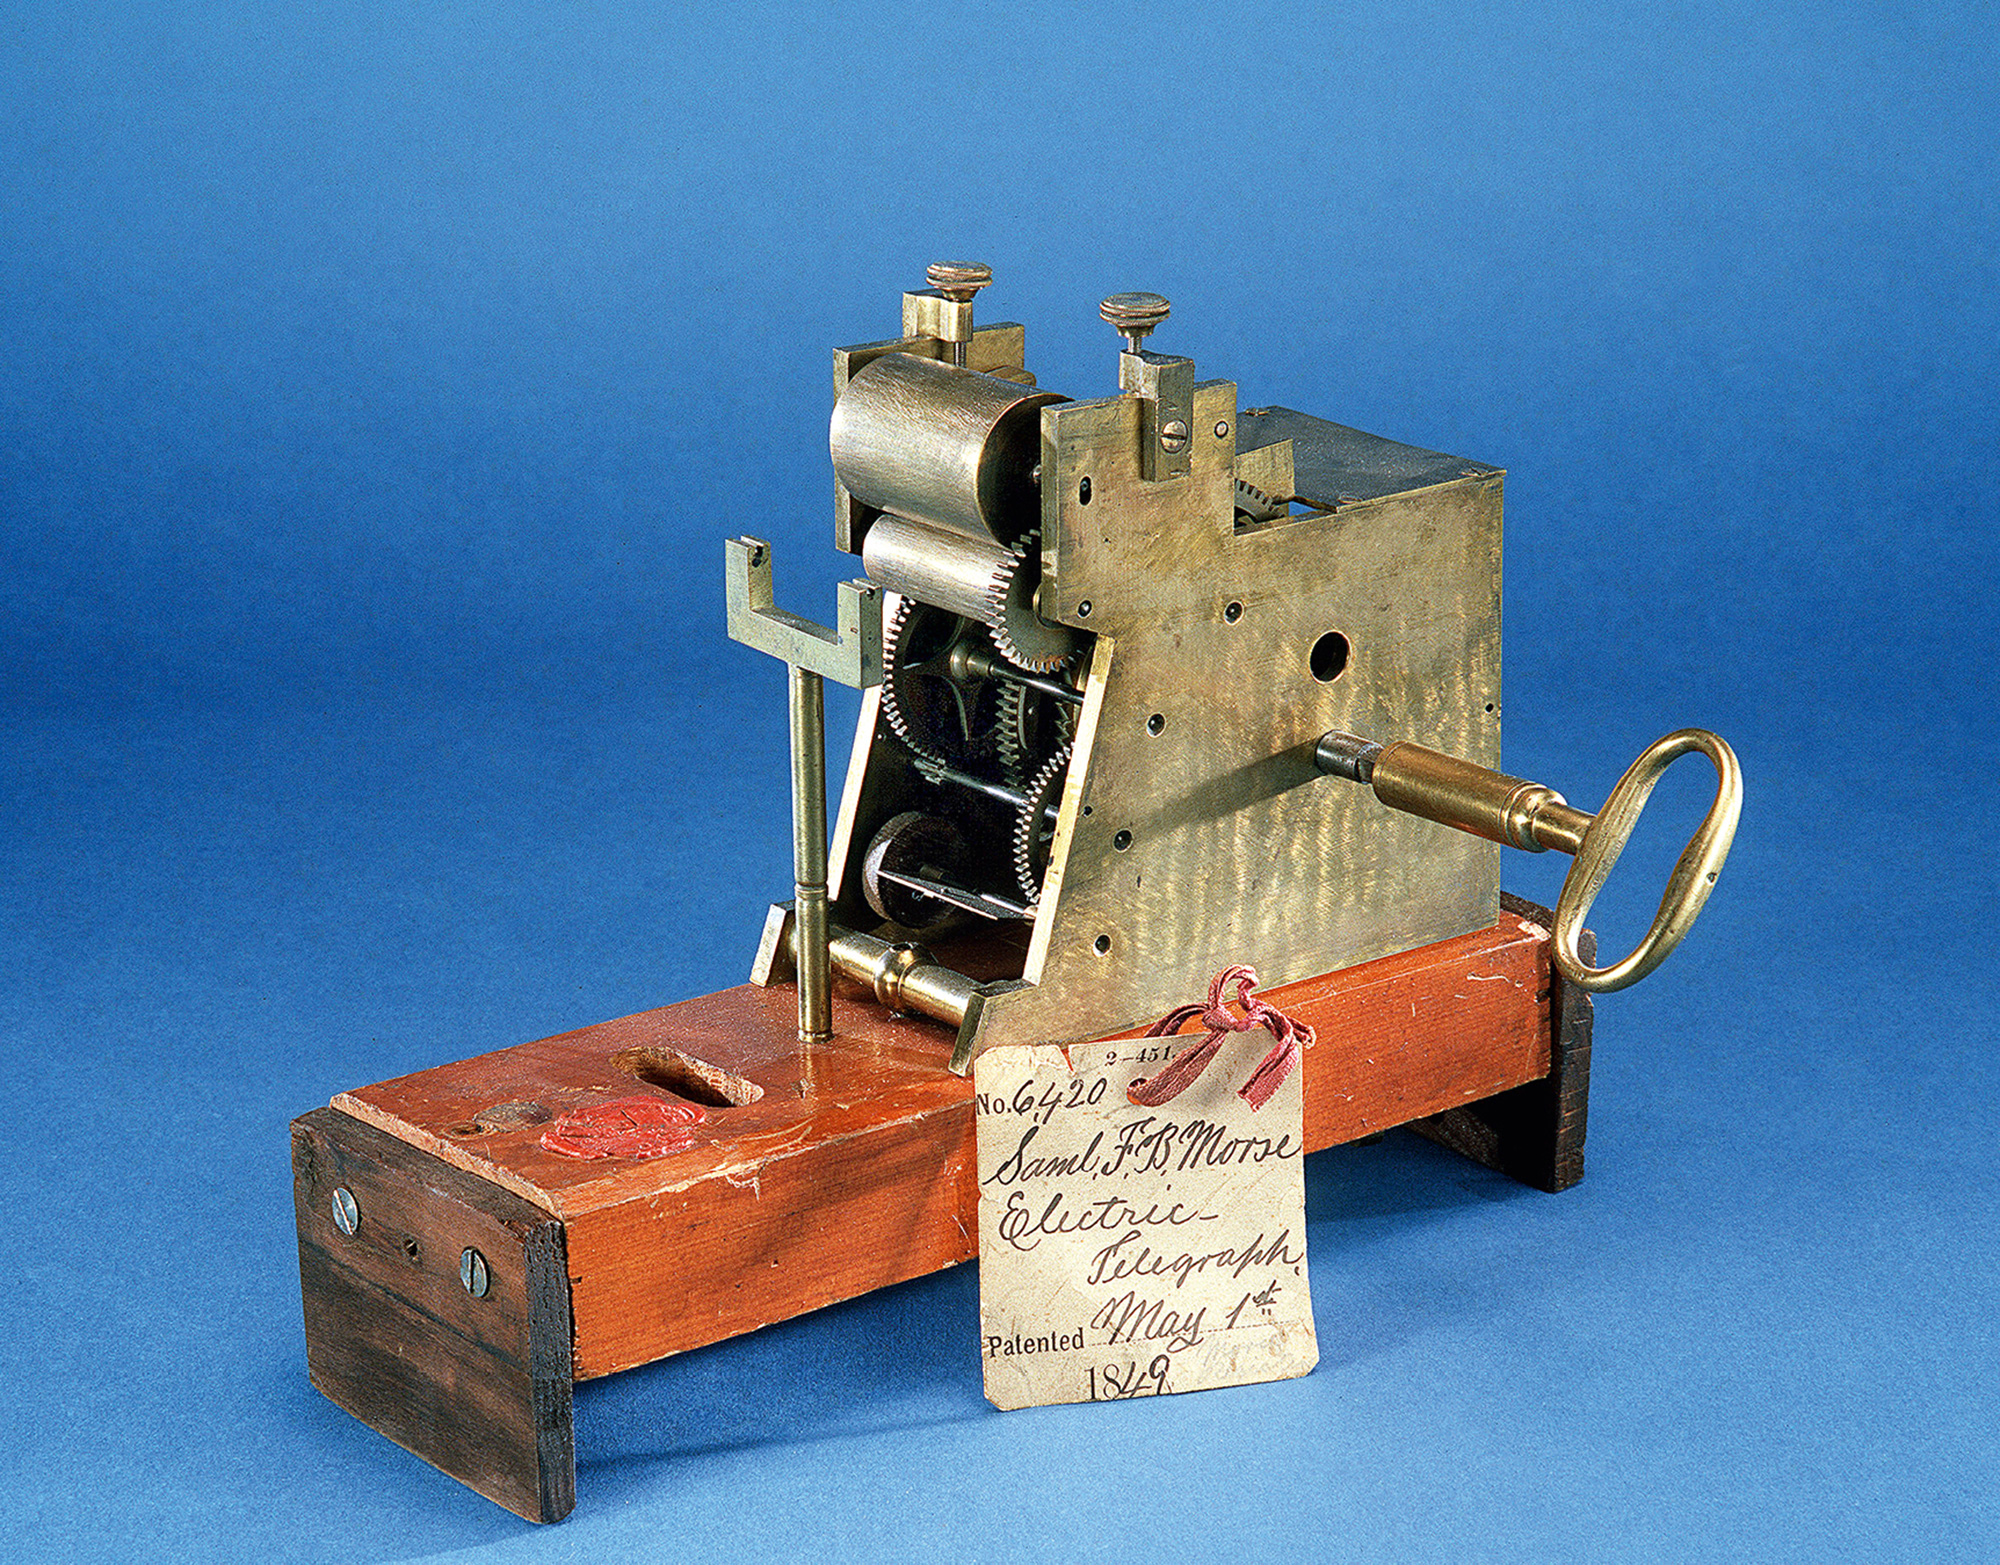 Samuel F. B. Morse conceived of an electromagnetic telegraph in 1832 and constructed an experimental version in 1835. His initial patent application in 1838 was approved in 1840. He received two further patents in 1846 and 1849, and this model of his 1844 receiver accompanied his application for the latter, in which he described a method for printing the dots and dashes of “Morse code” on paper. Courtesy Division of Work and Industry, National Museum of American History, Smithsonian Institution.